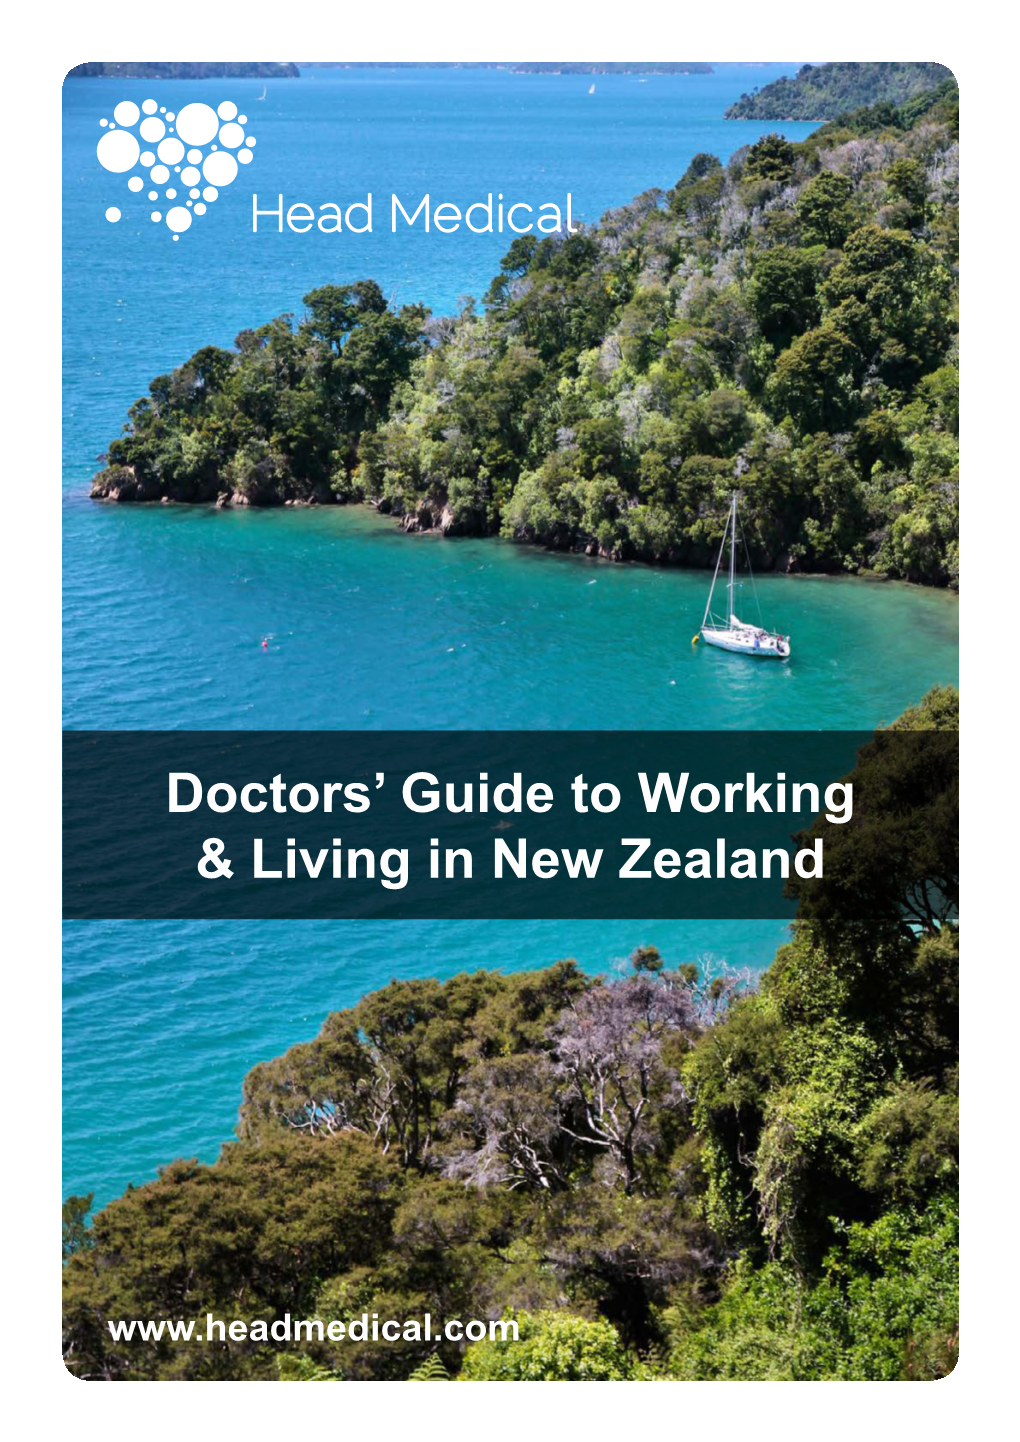 Doctors' Guide to Working & Living in New Zealand